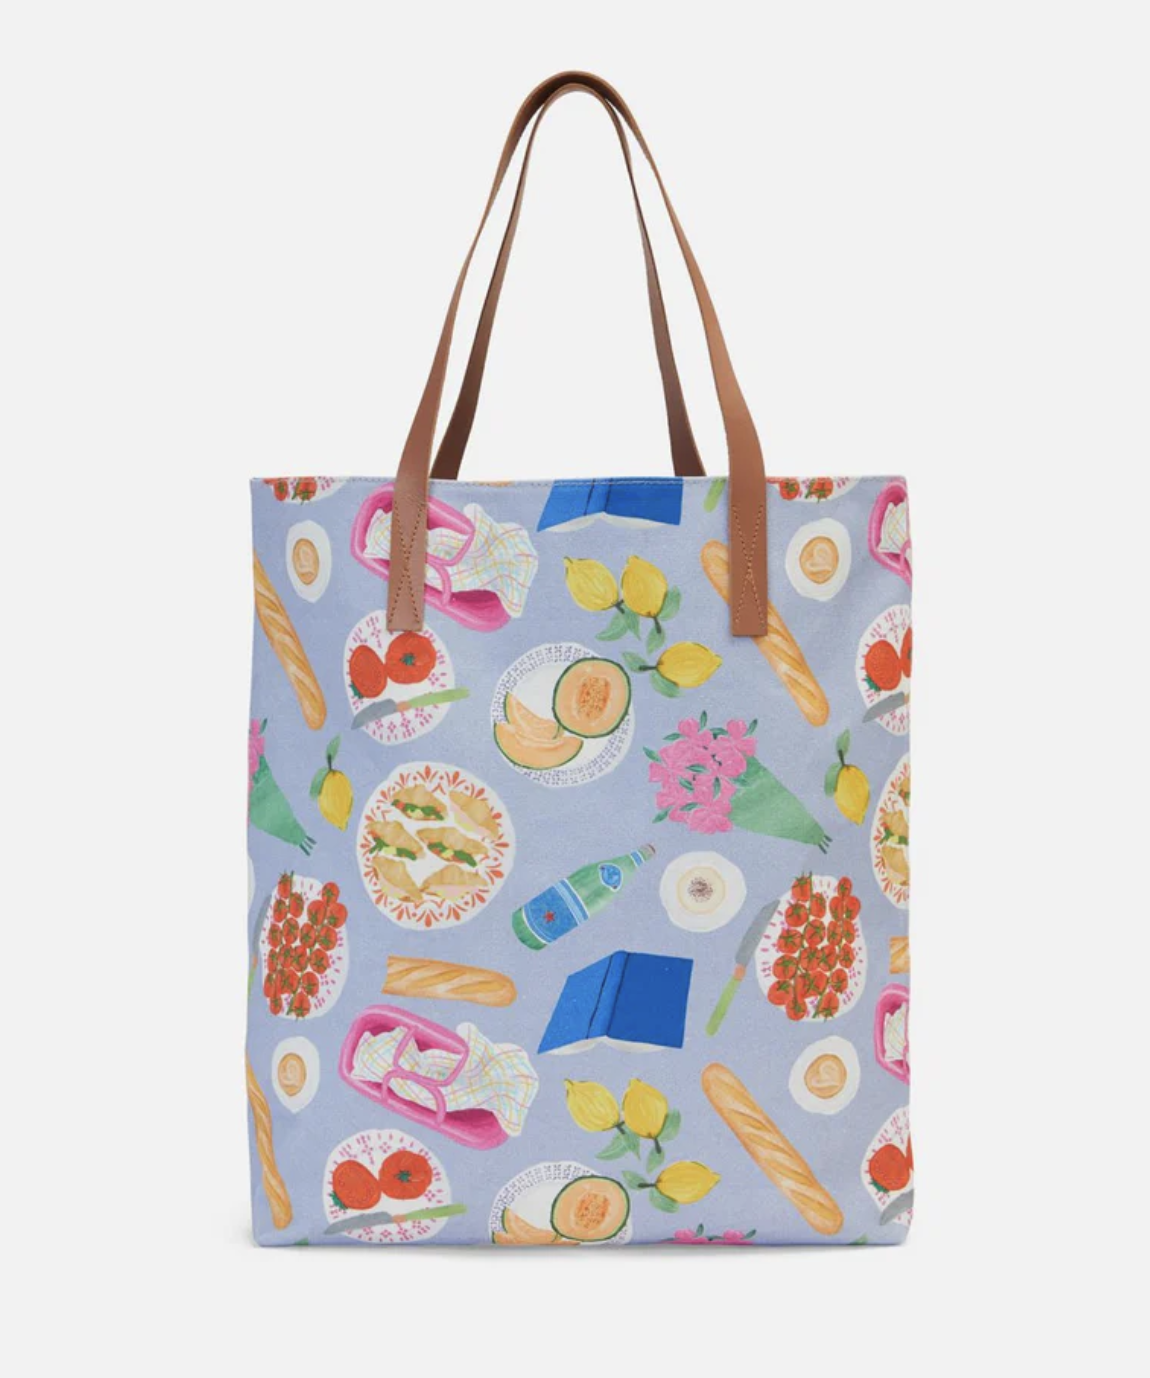 A patterned tote bag with various illustrated foods and flowers